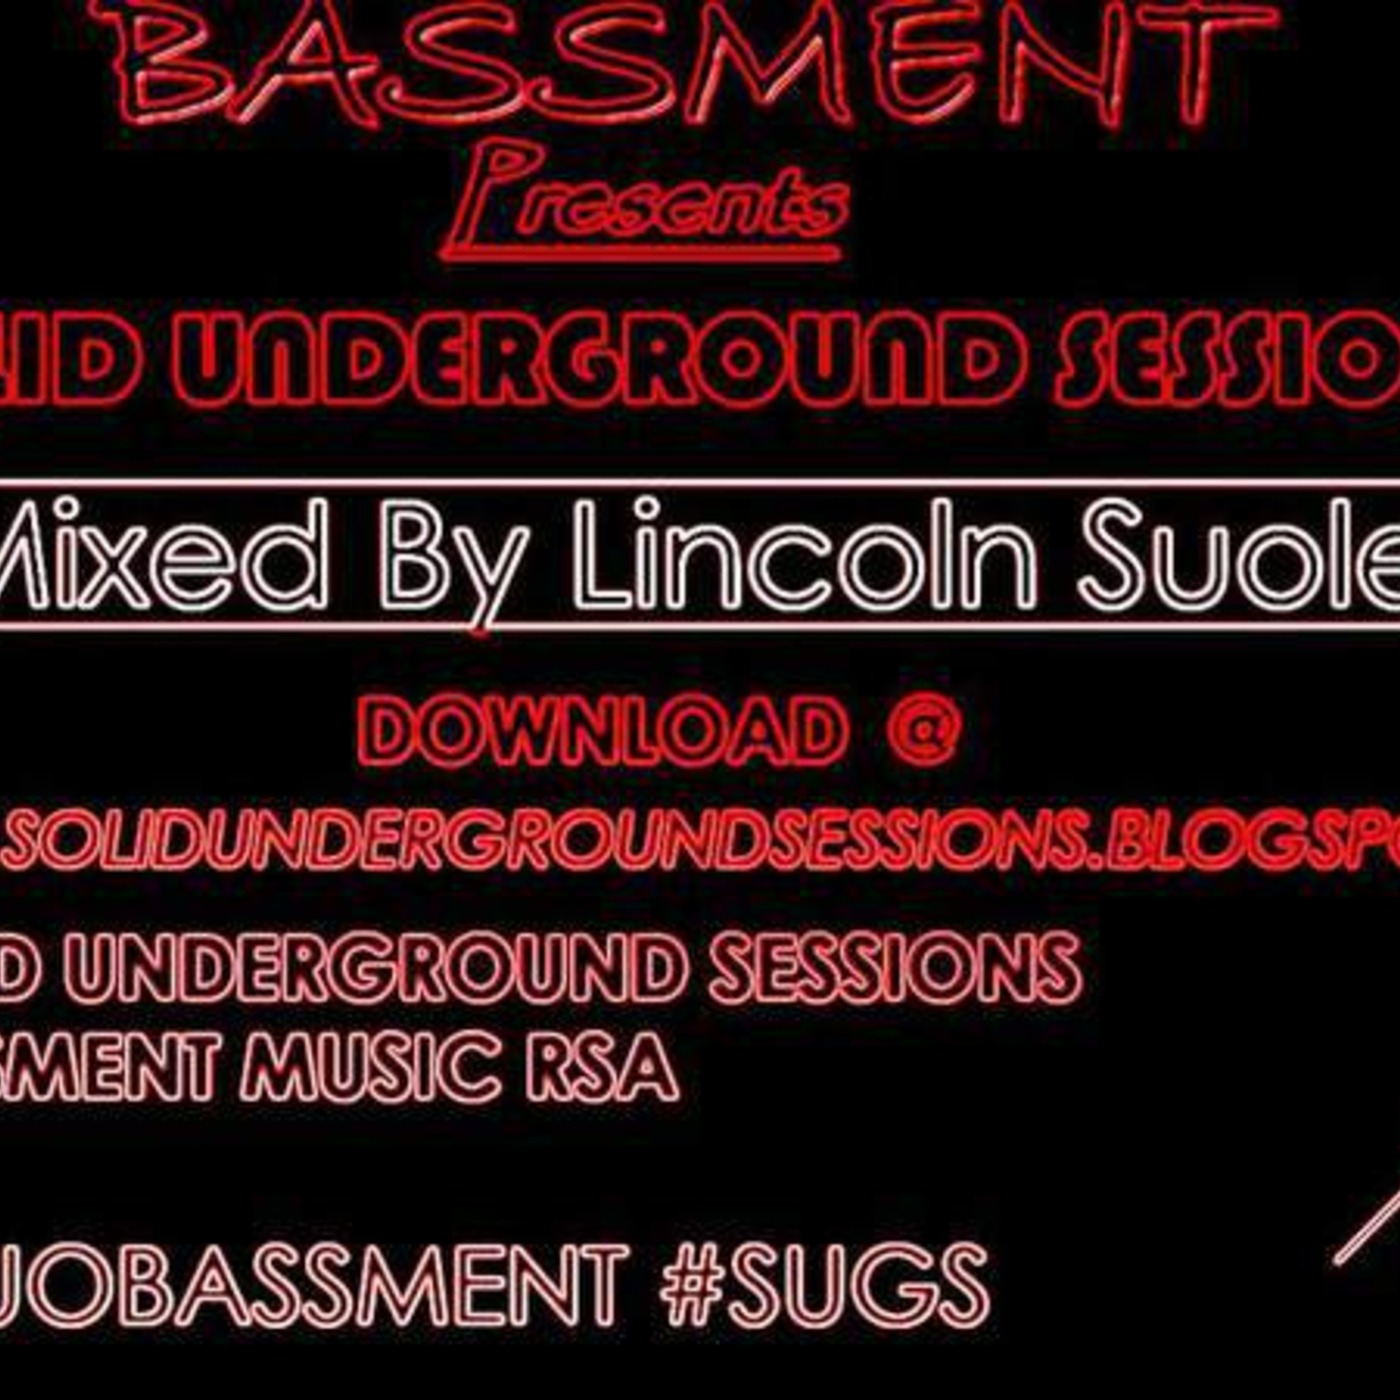 #5 Mixed By Lincoln Suole #SUGS